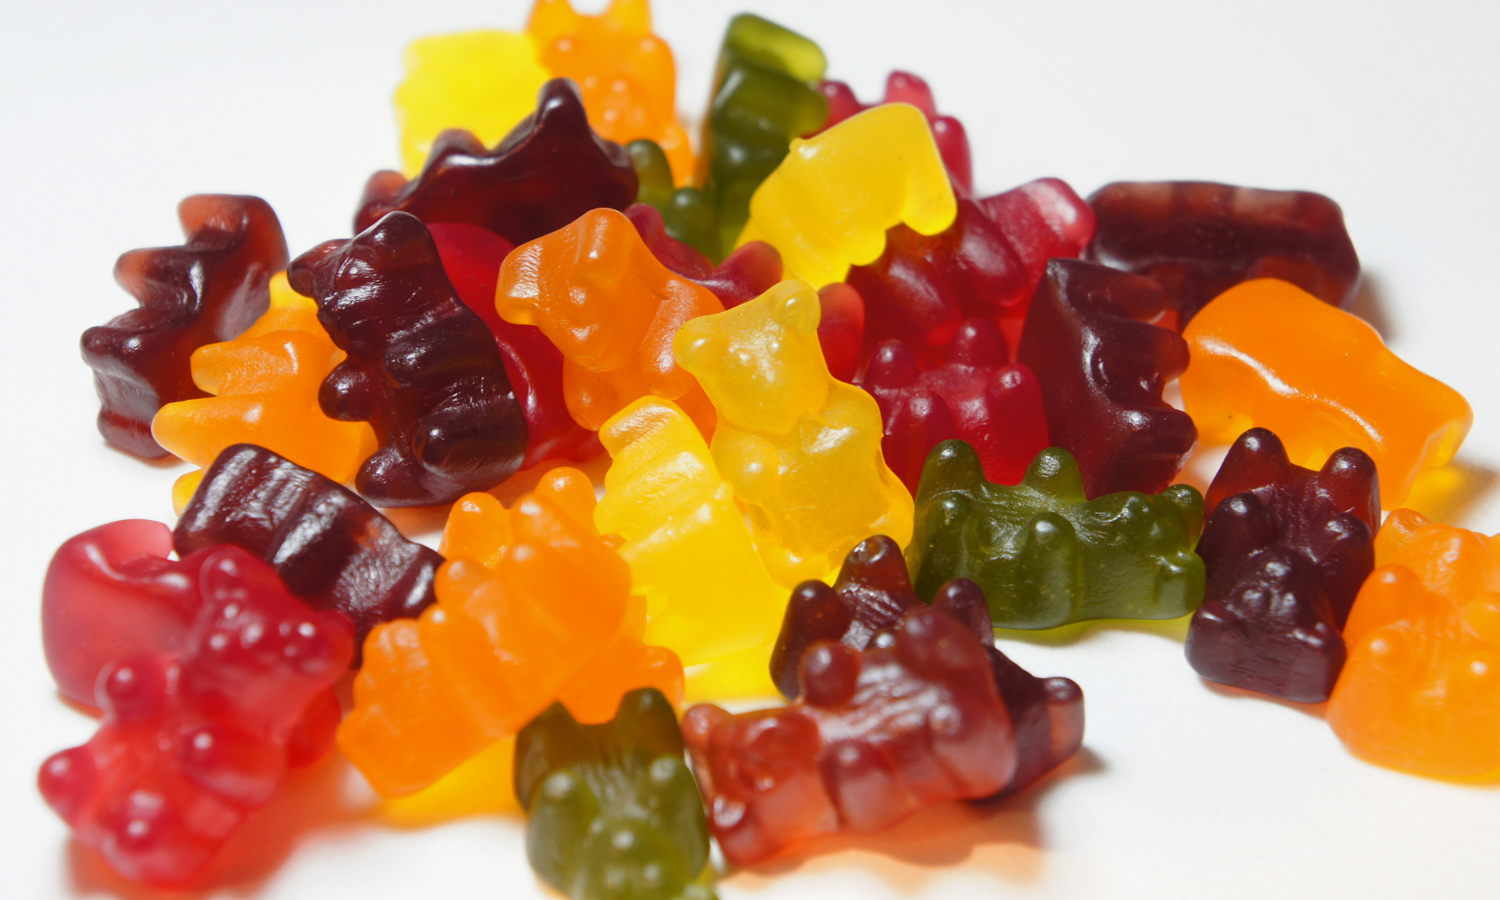 How to store weed gummies